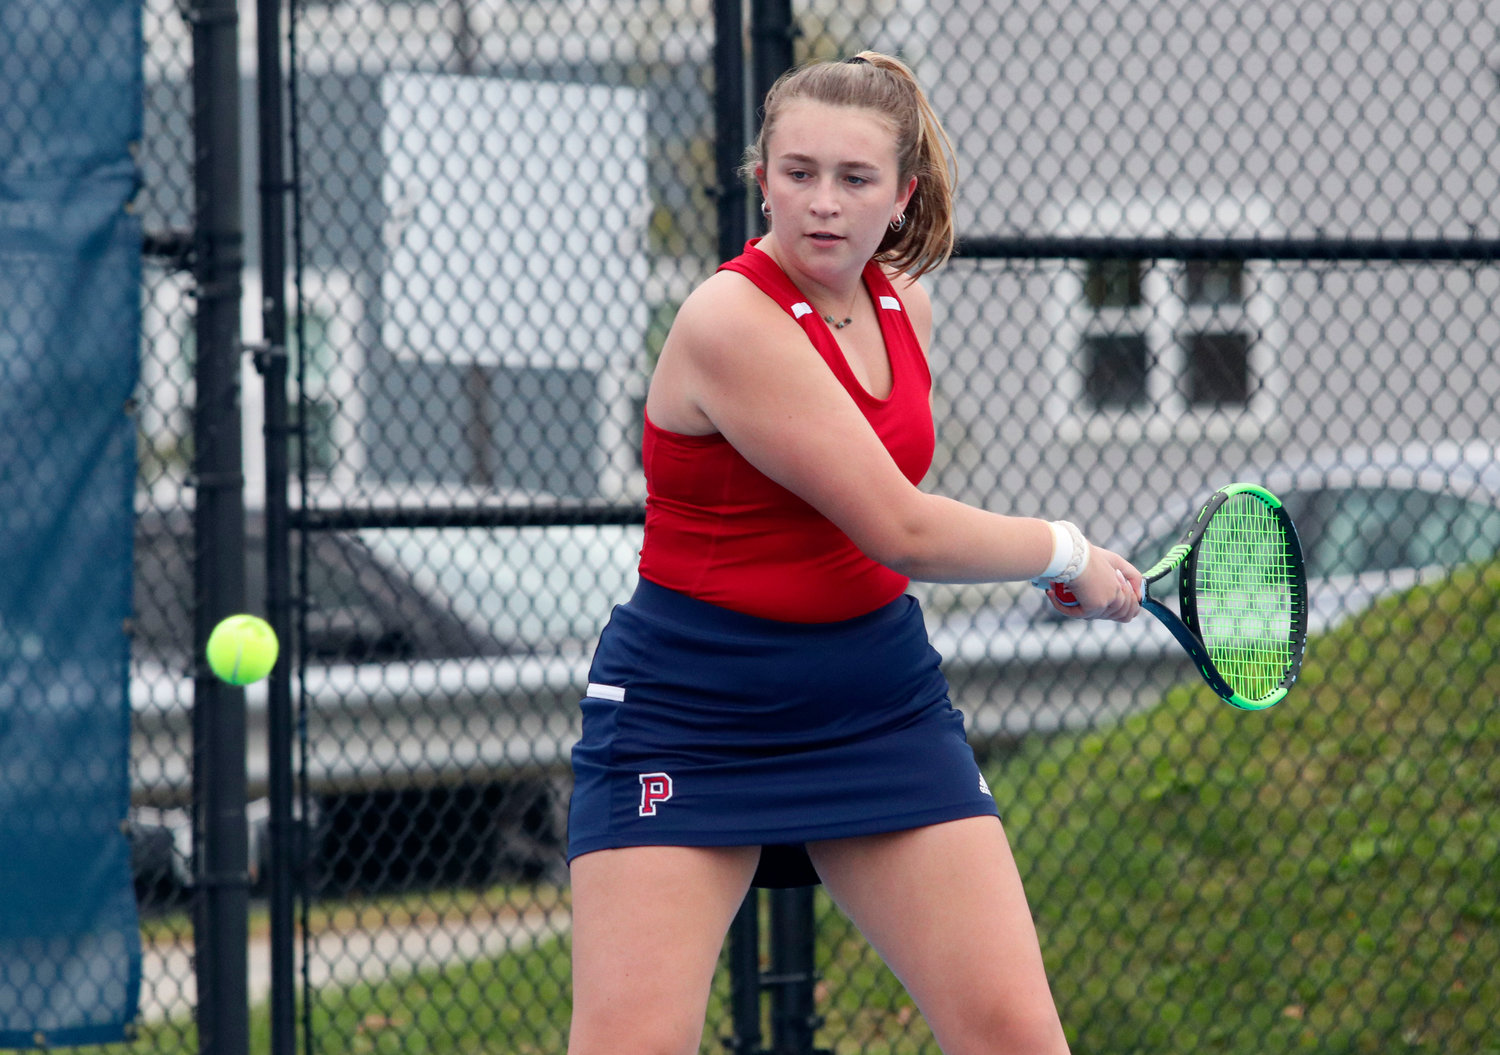 Portsmouth’s Dylan O'Connor lost to Eva White in straight sets, 6-1, 6-2, in the No. 2 singles match.